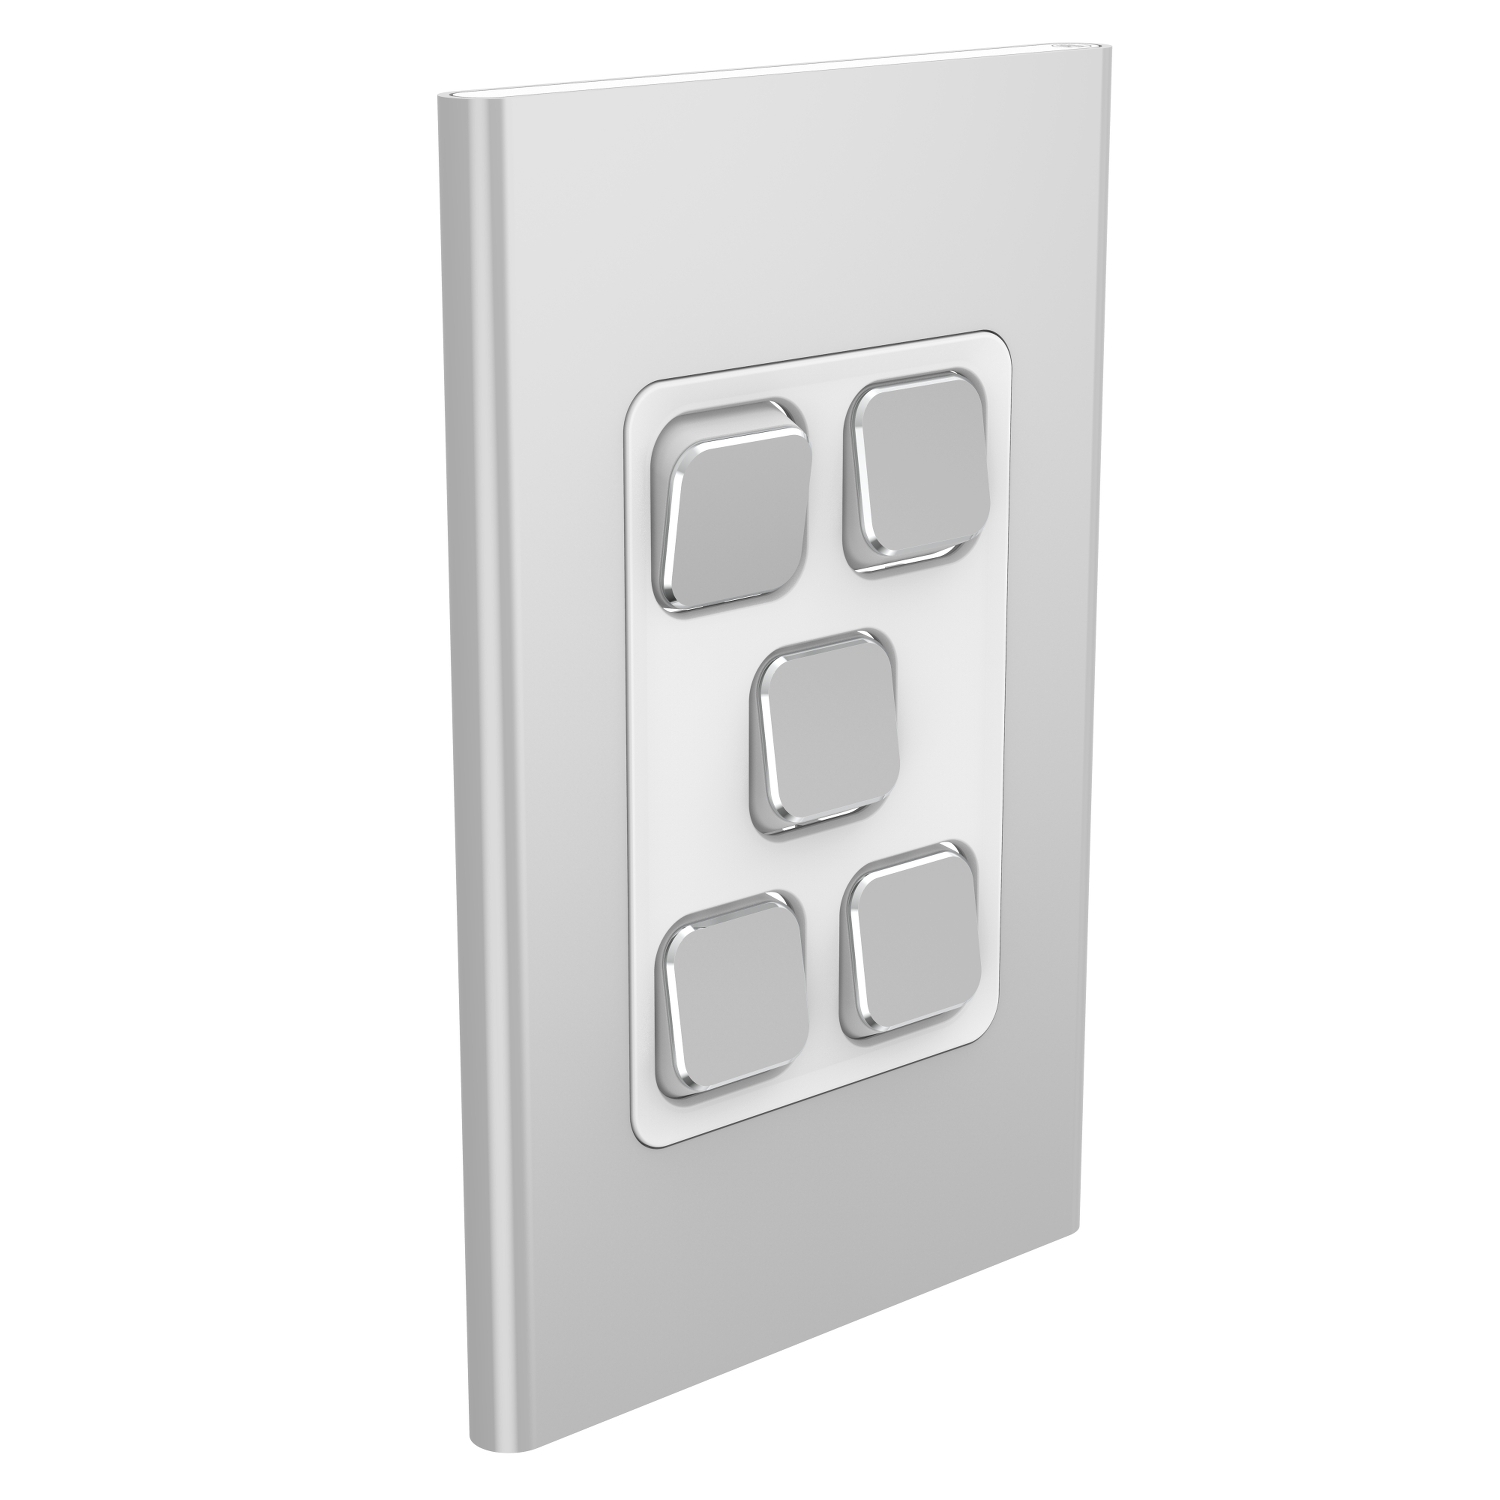 PDL Iconic Styl, cover frame, 5 switches, vertical - Silver